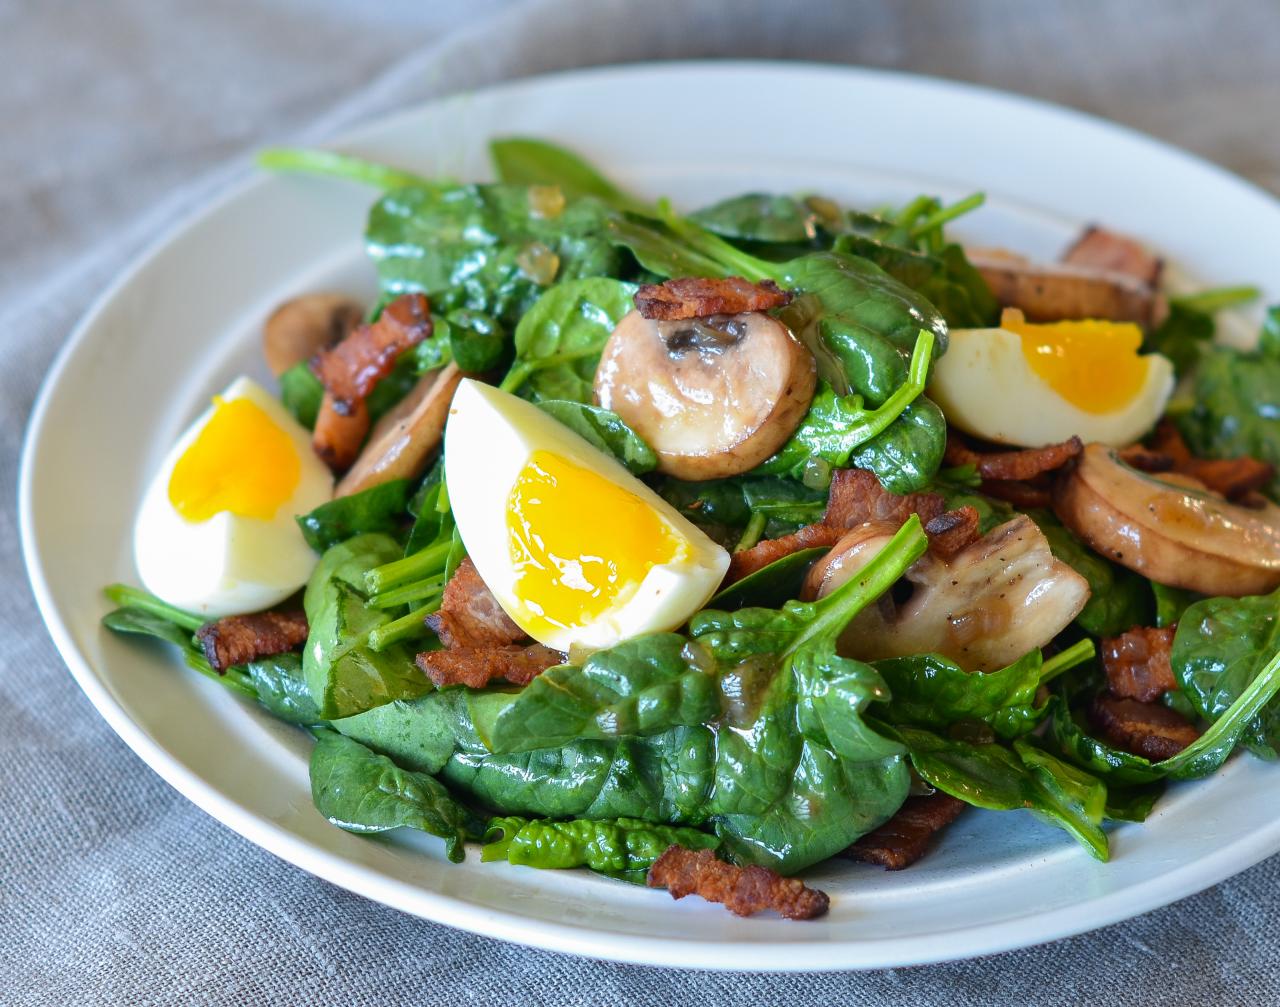 Spinach Salad Recipe: Hot Spinach Salad With Bacon and Vinegar